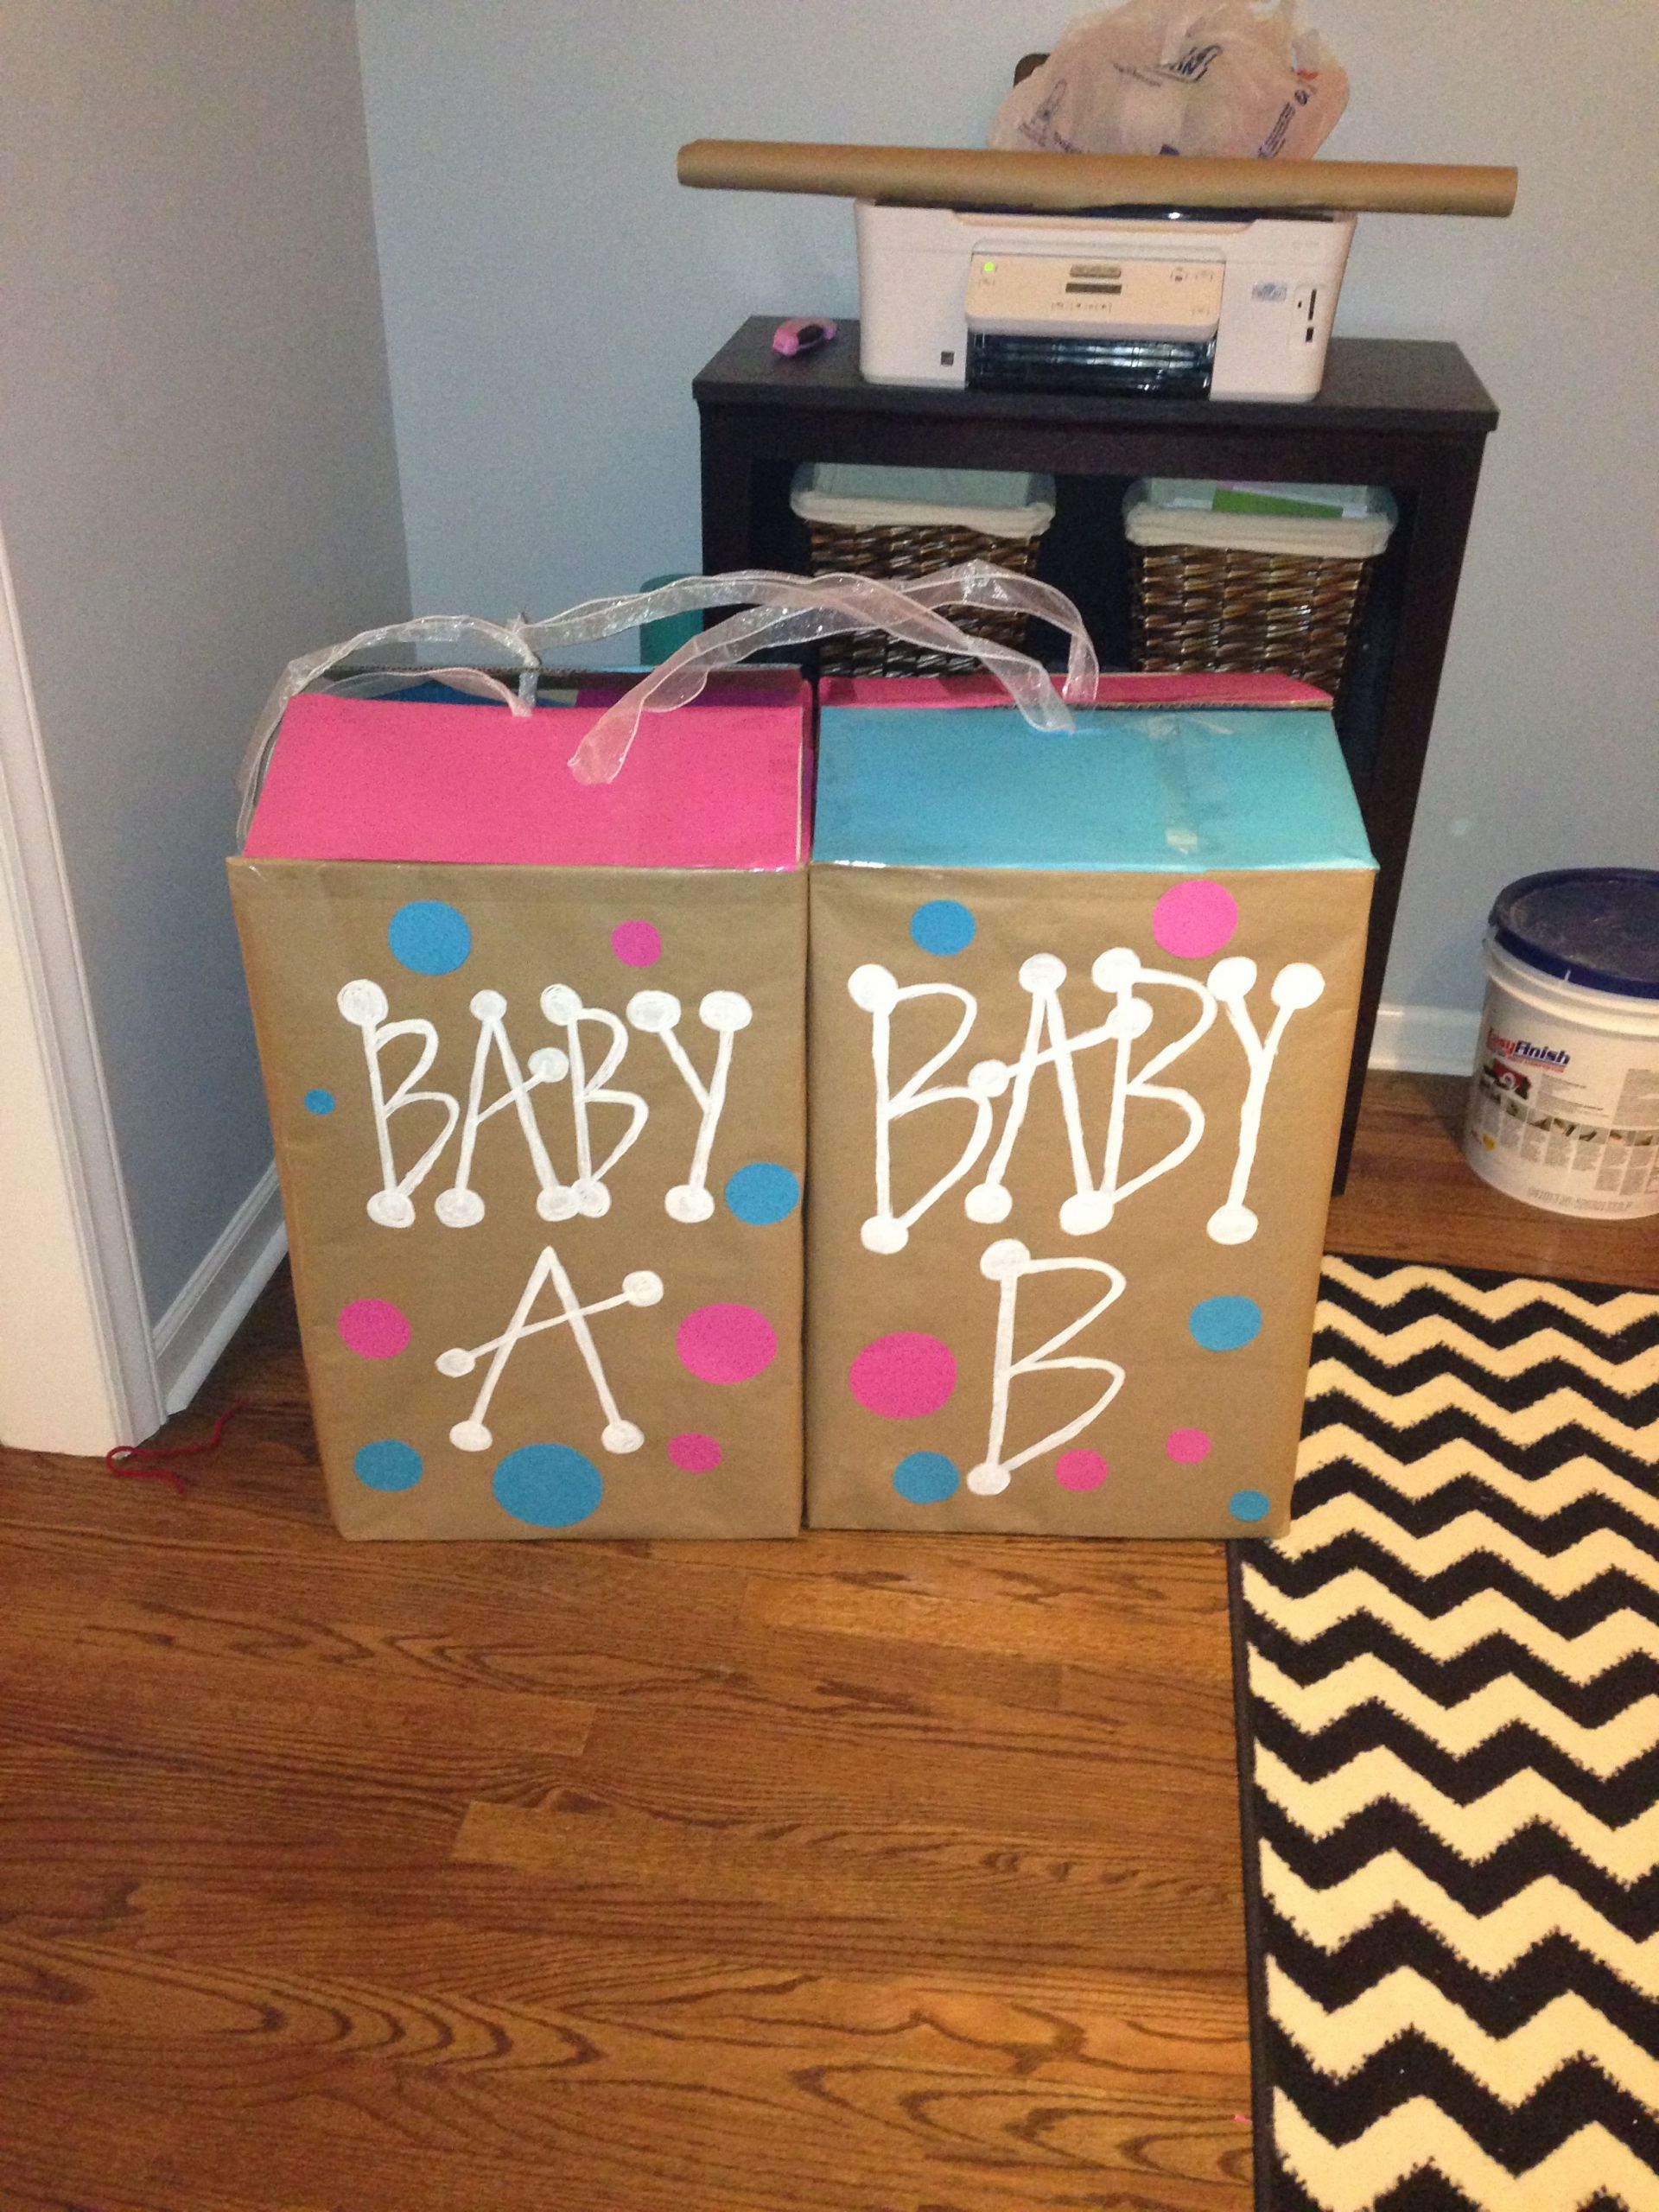 Baby Gender Reveal Party Ideas For Twins
 Baby a and baby b gender reveal boxes For twins